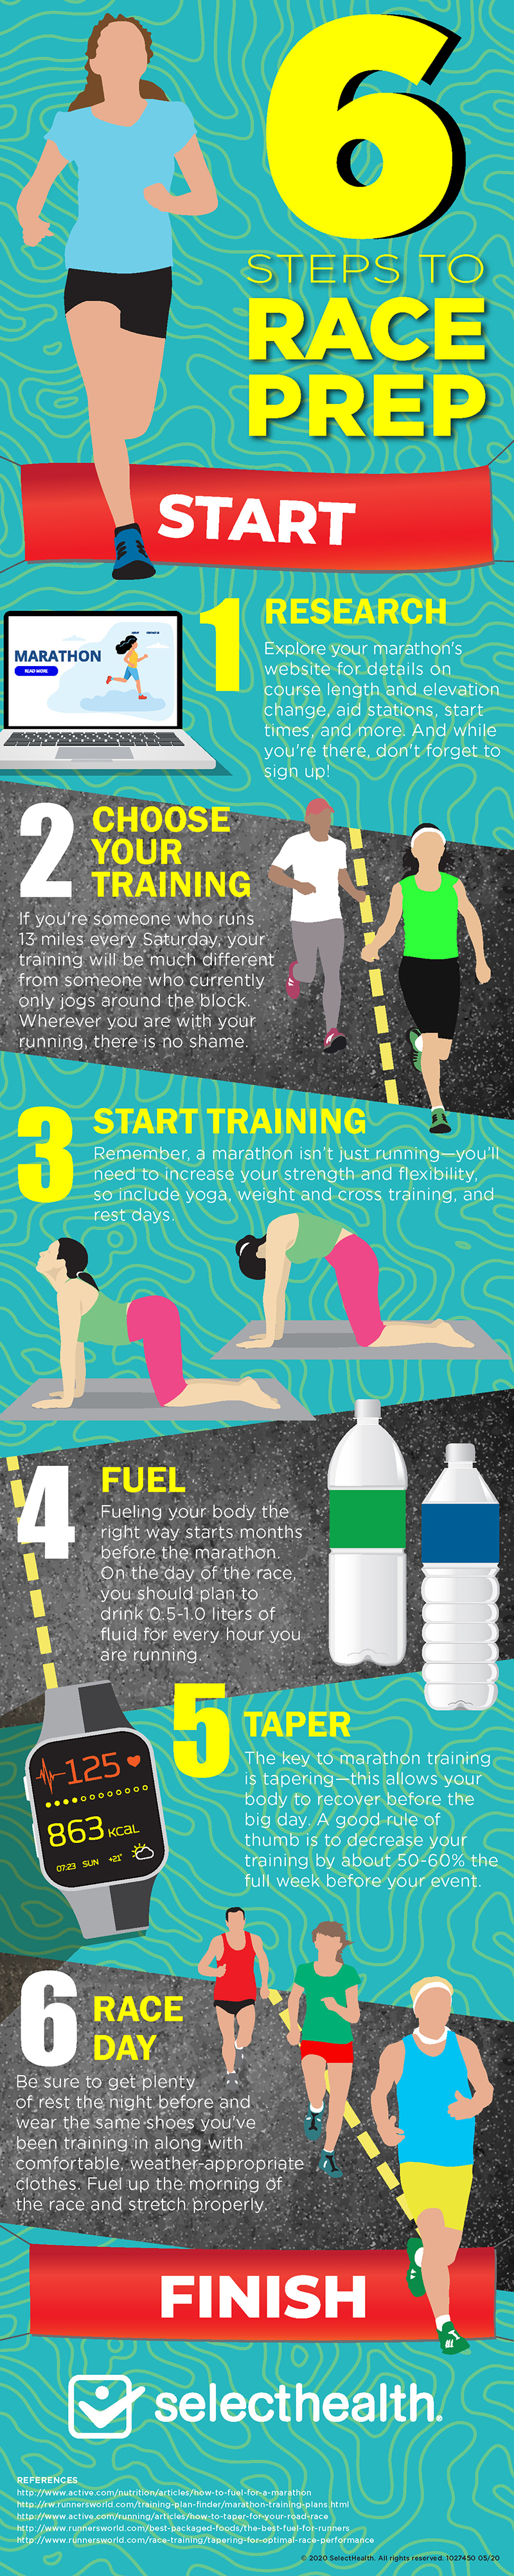 Infographic with 6 steps to help you prepare for a race, running LG